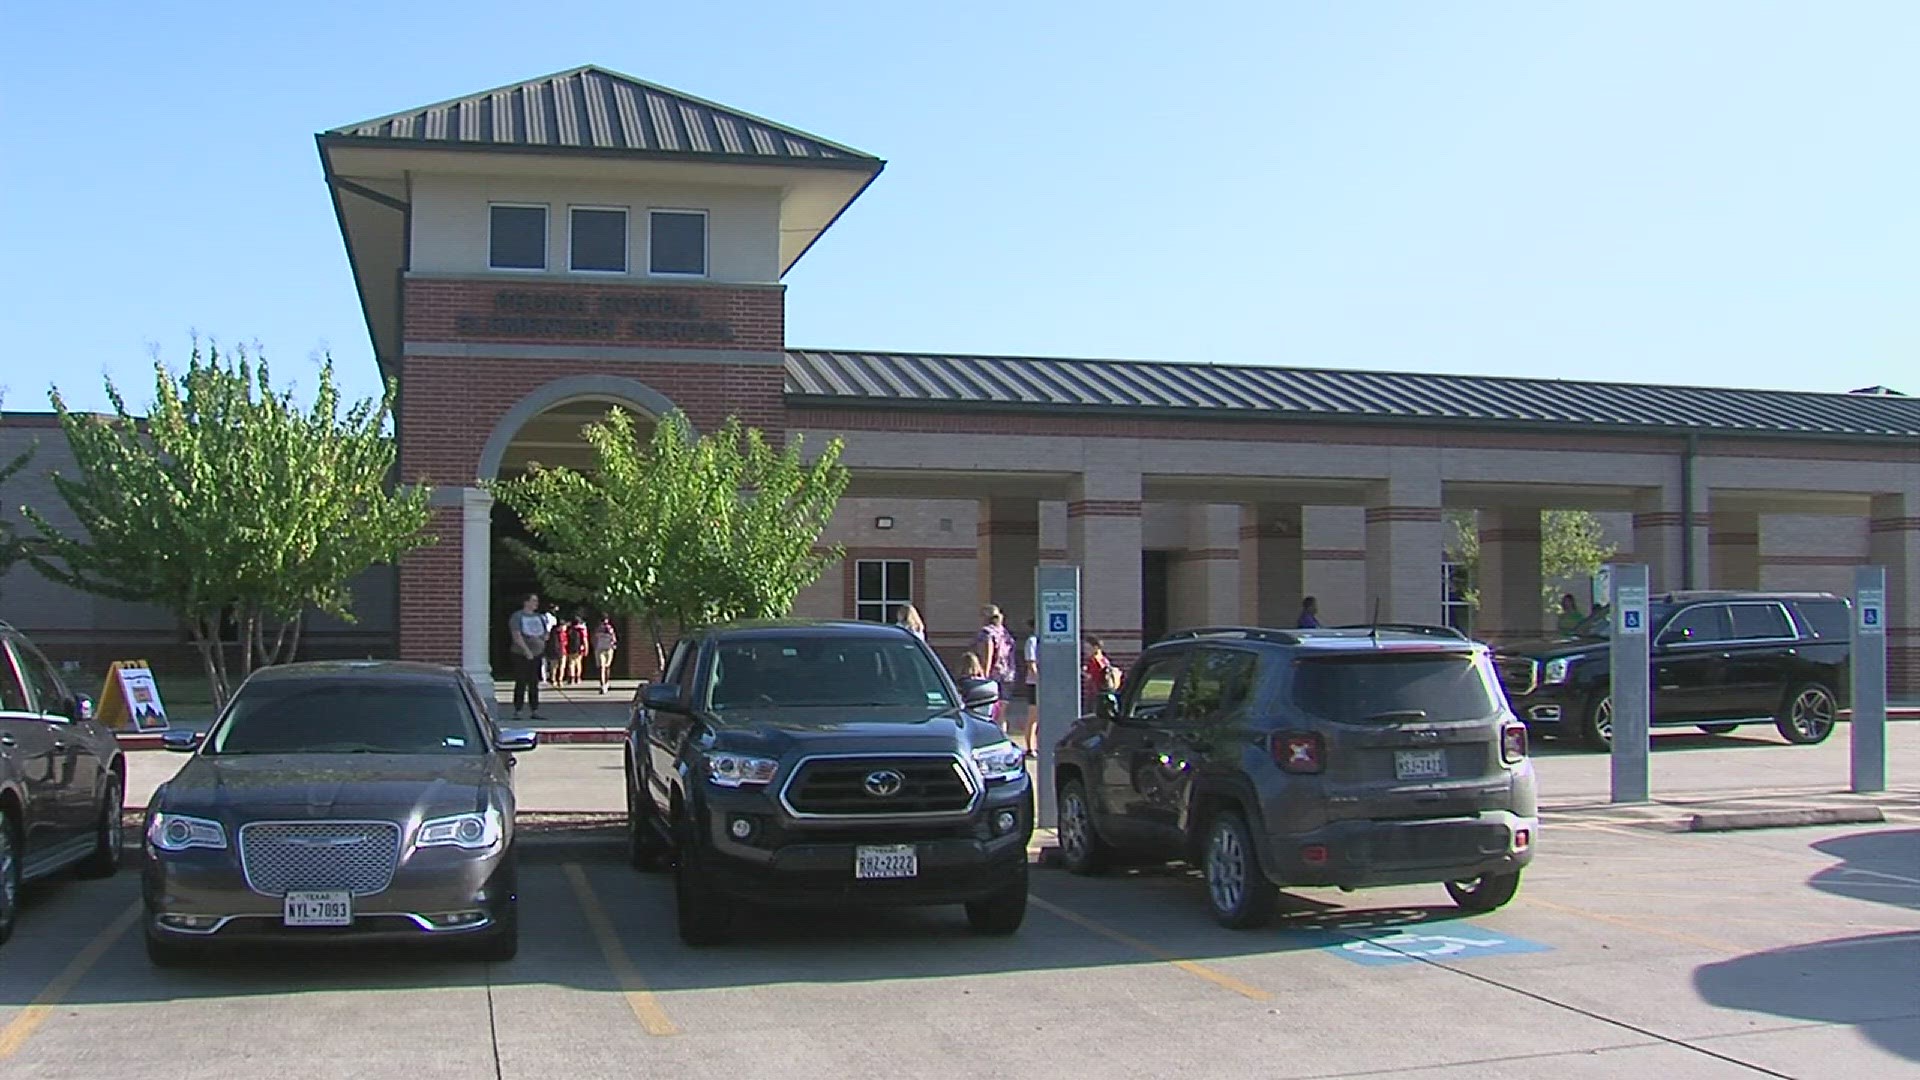 Administrators were still receiving students and breakfast was being served according to the district.